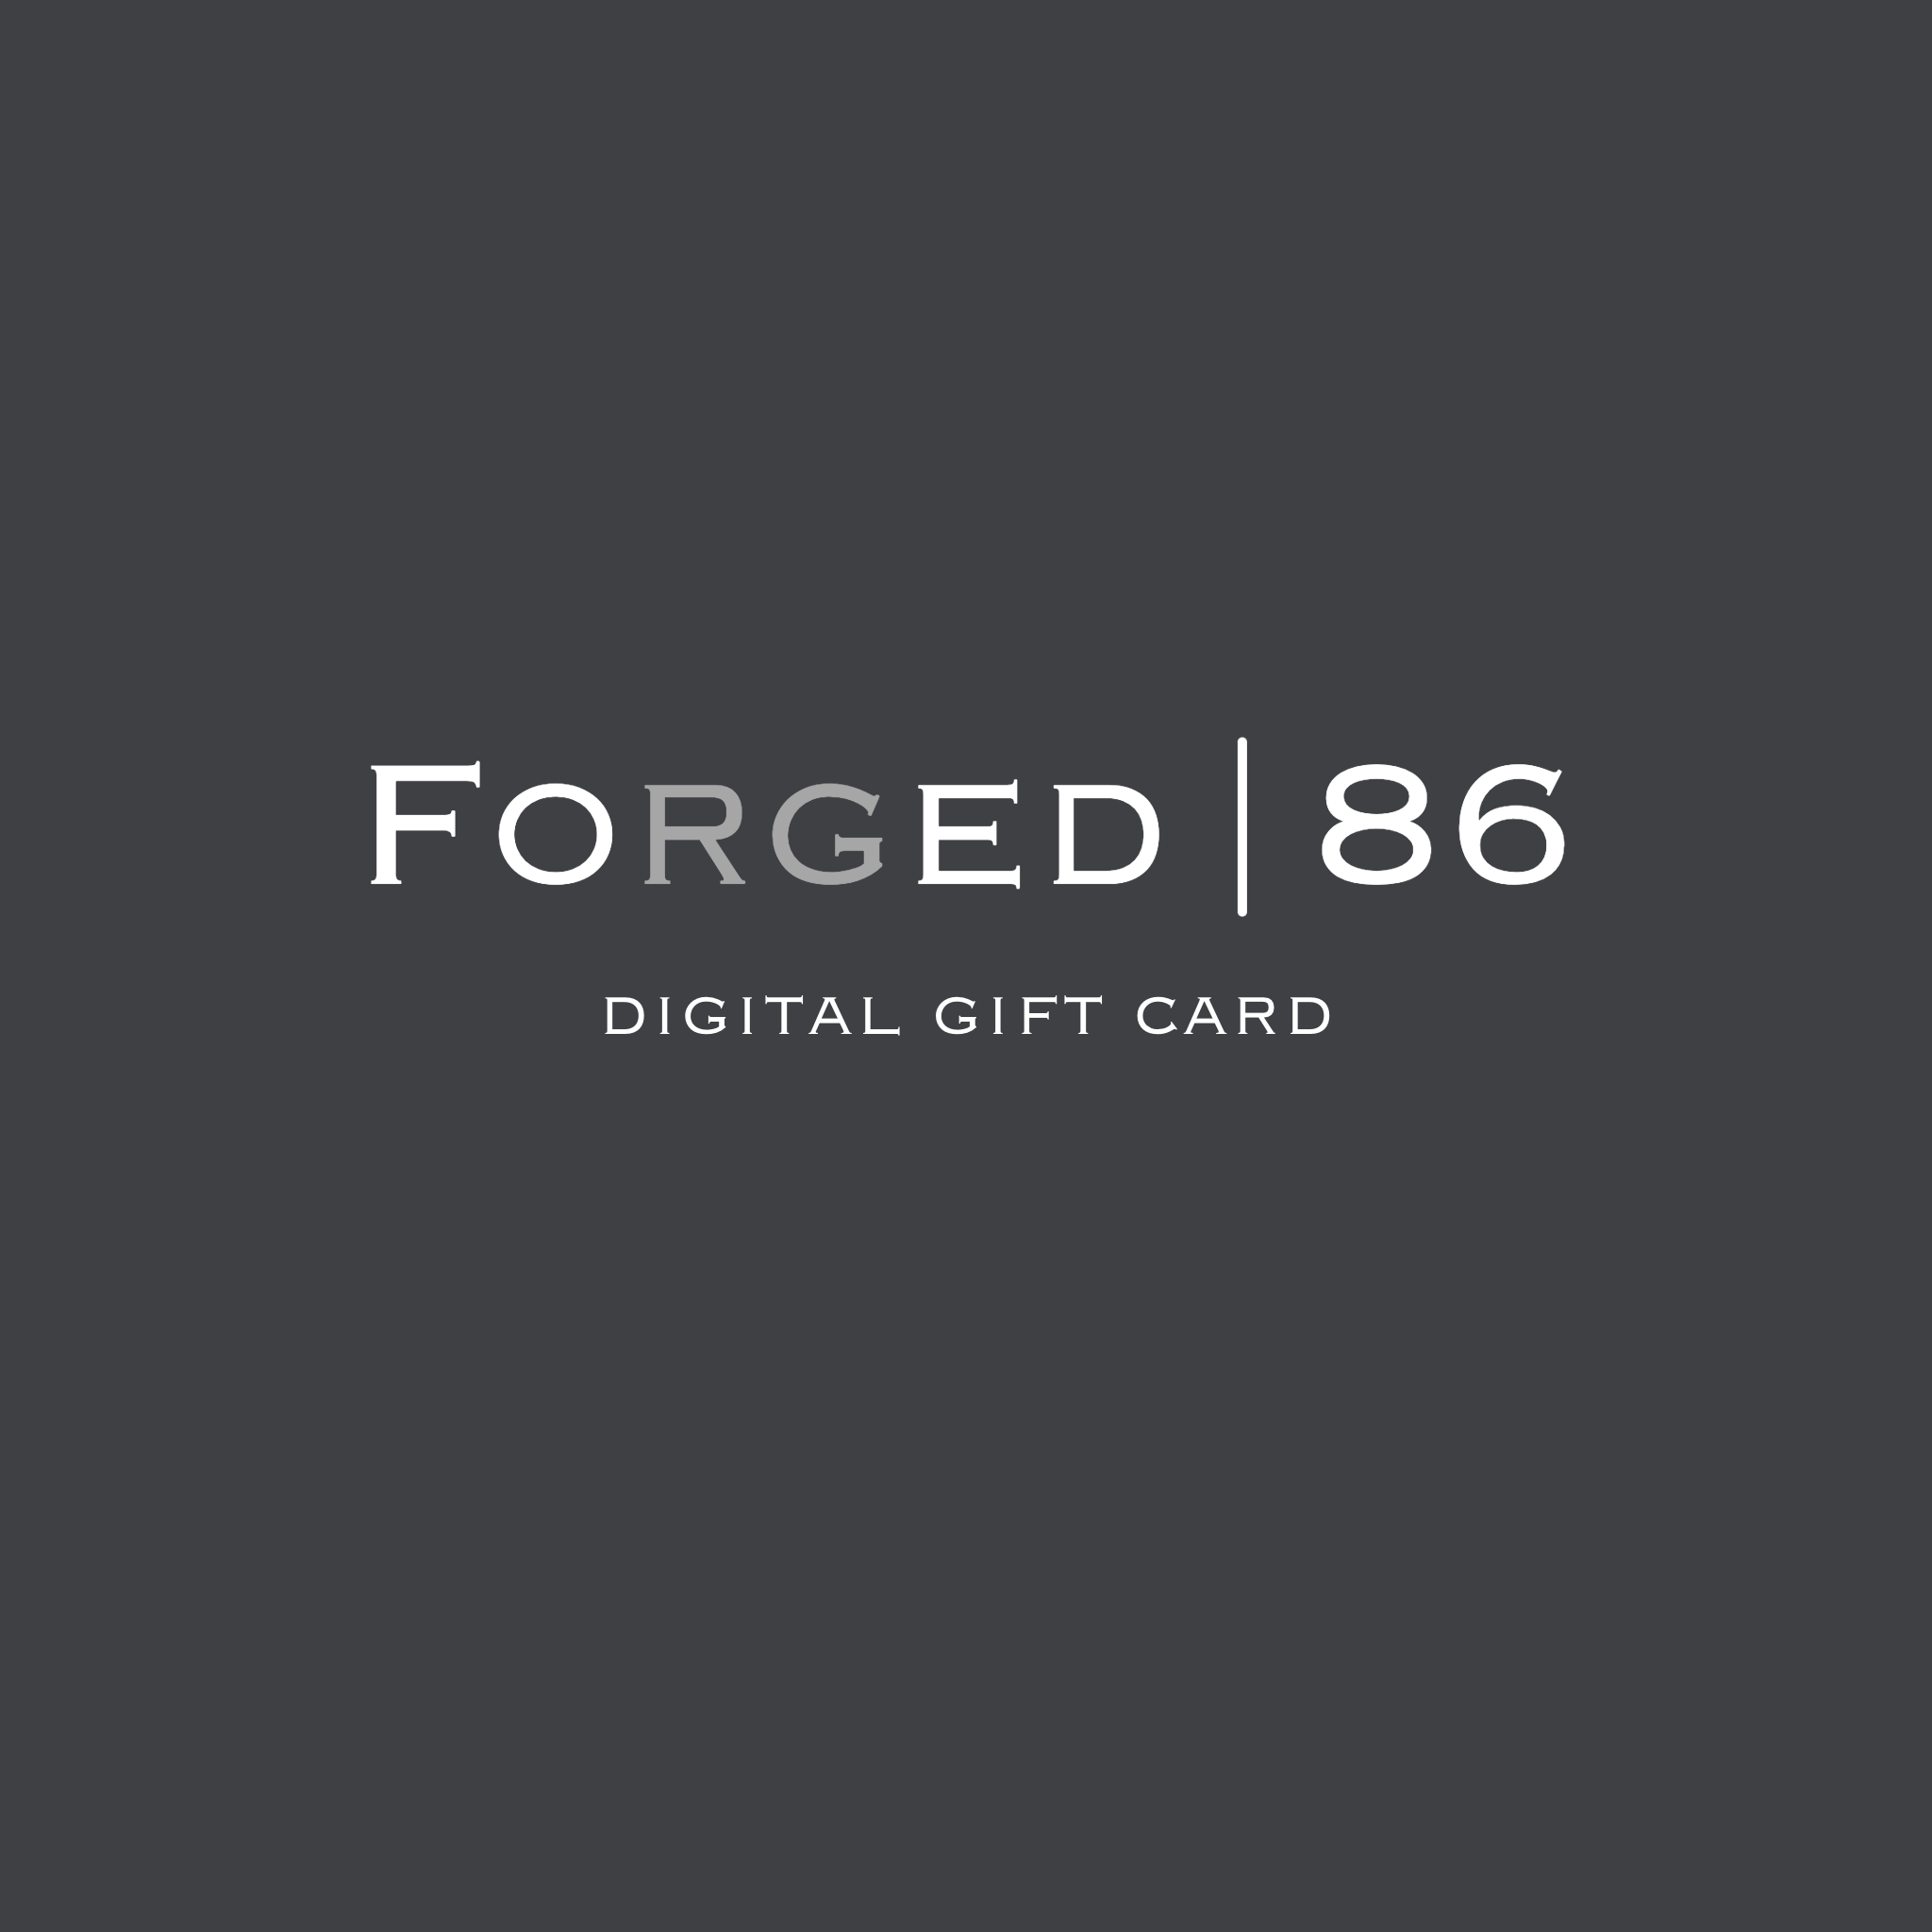 Forged | 86 Gift card